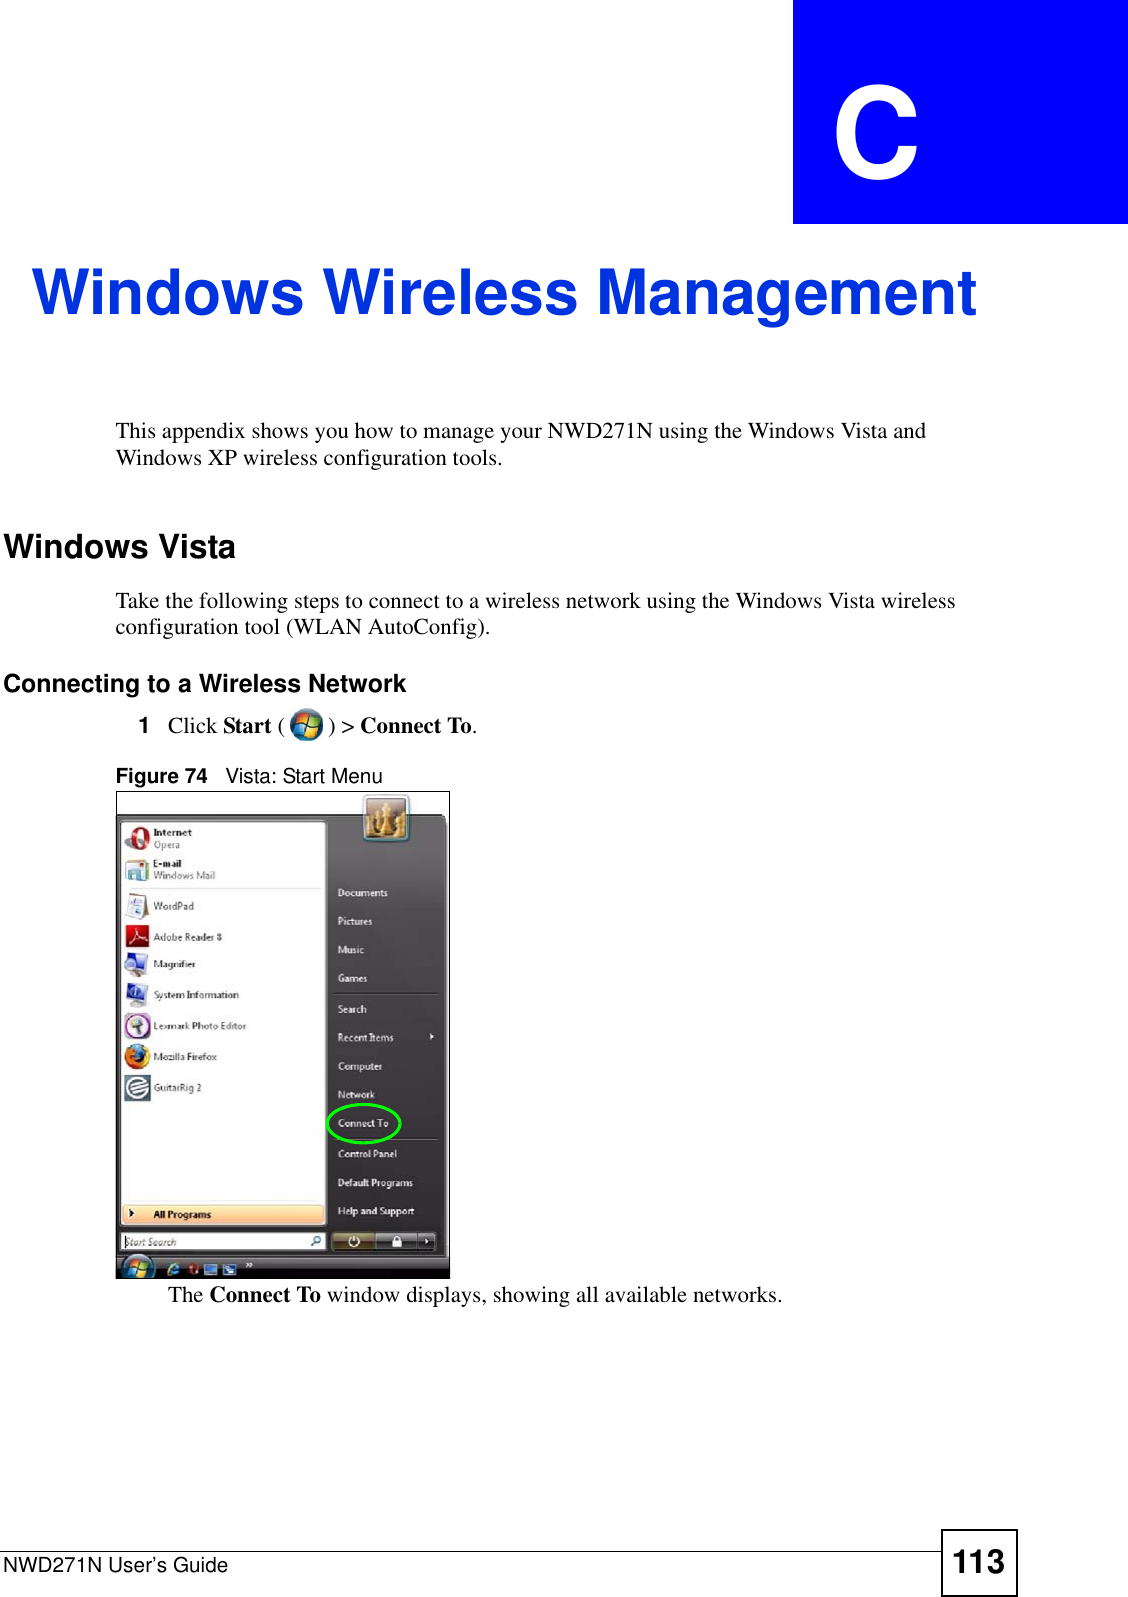 NWD271N User’s Guide 113APPENDIX  C Windows Wireless ManagementThis appendix shows you how to manage your NWD271N using the Windows Vista and Windows XP wireless configuration tools.Windows VistaTake the following steps to connect to a wireless network using the Windows Vista wireless configuration tool (WLAN AutoConfig).Connecting to a Wireless Network1Click Start () &gt; Connect To. Figure 74   Vista: Start MenuThe Connect To window displays, showing all available networks. 